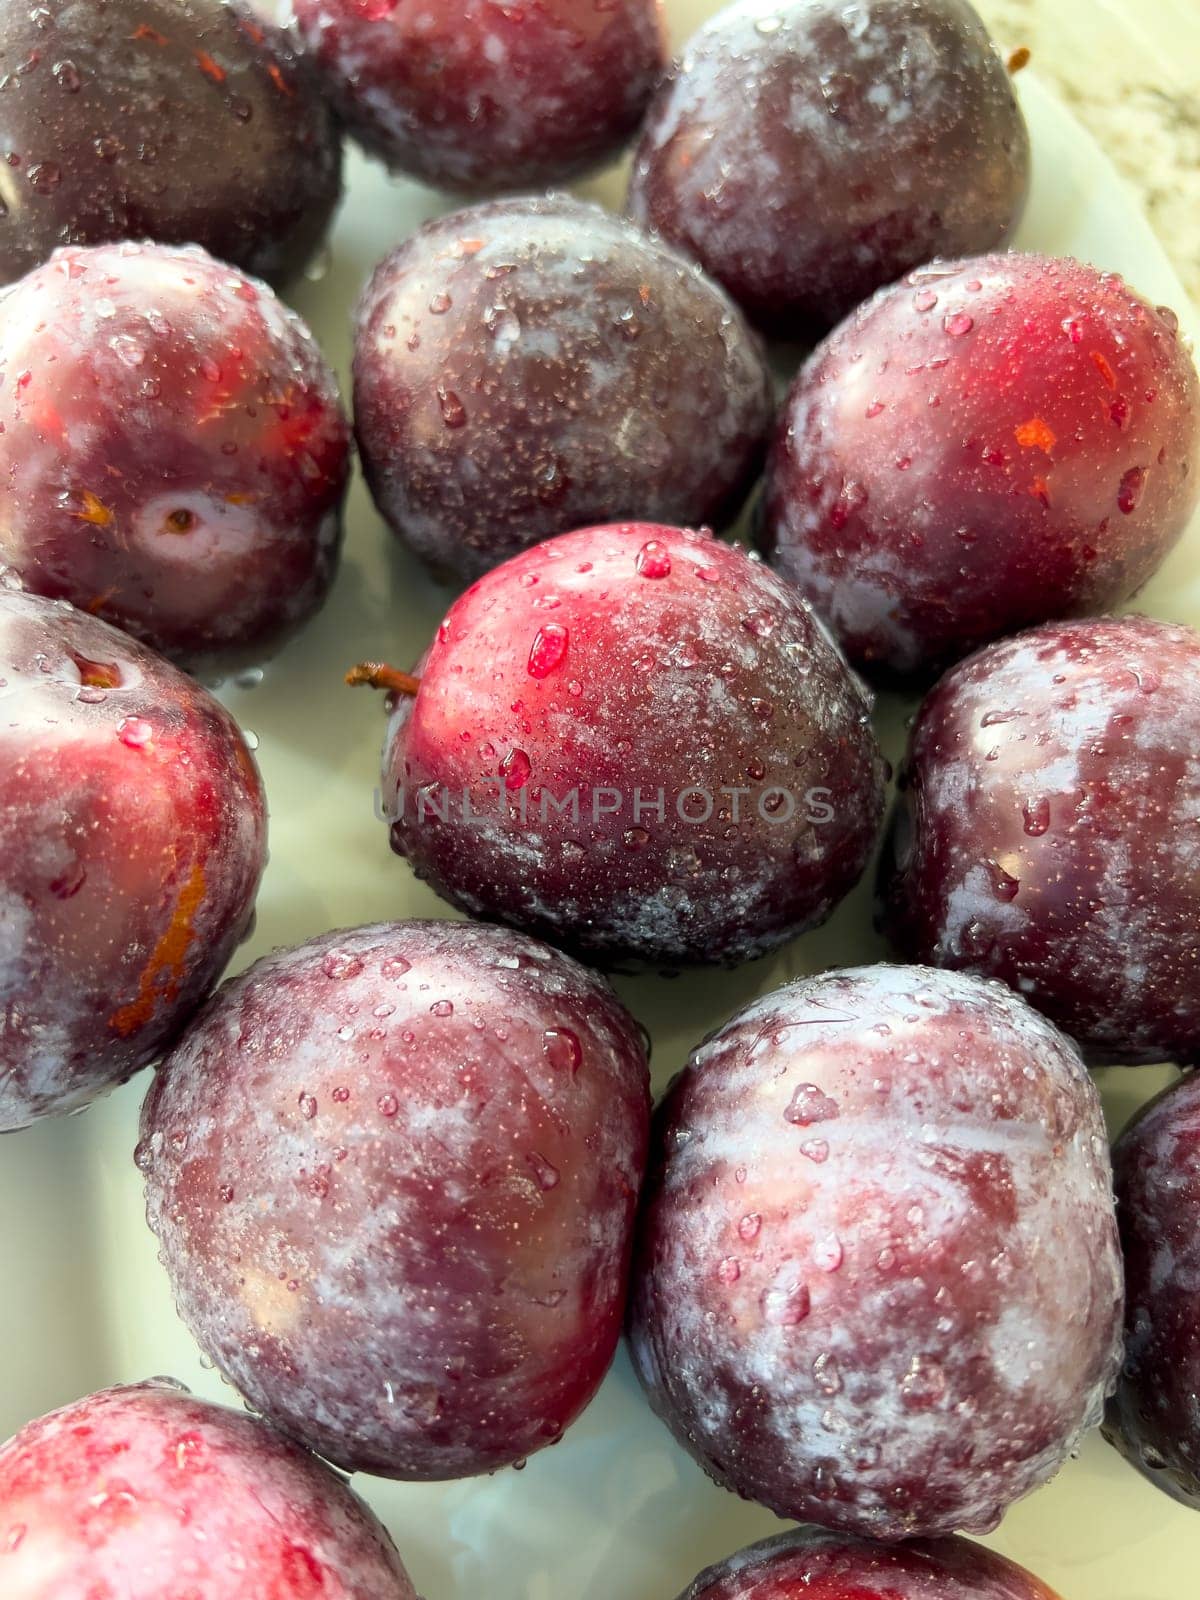 A plate of ripe, frosty plums sits prominently on a marble countertop in a sunlit kitchen with a crisp, white interior and neatly arranged appliances.